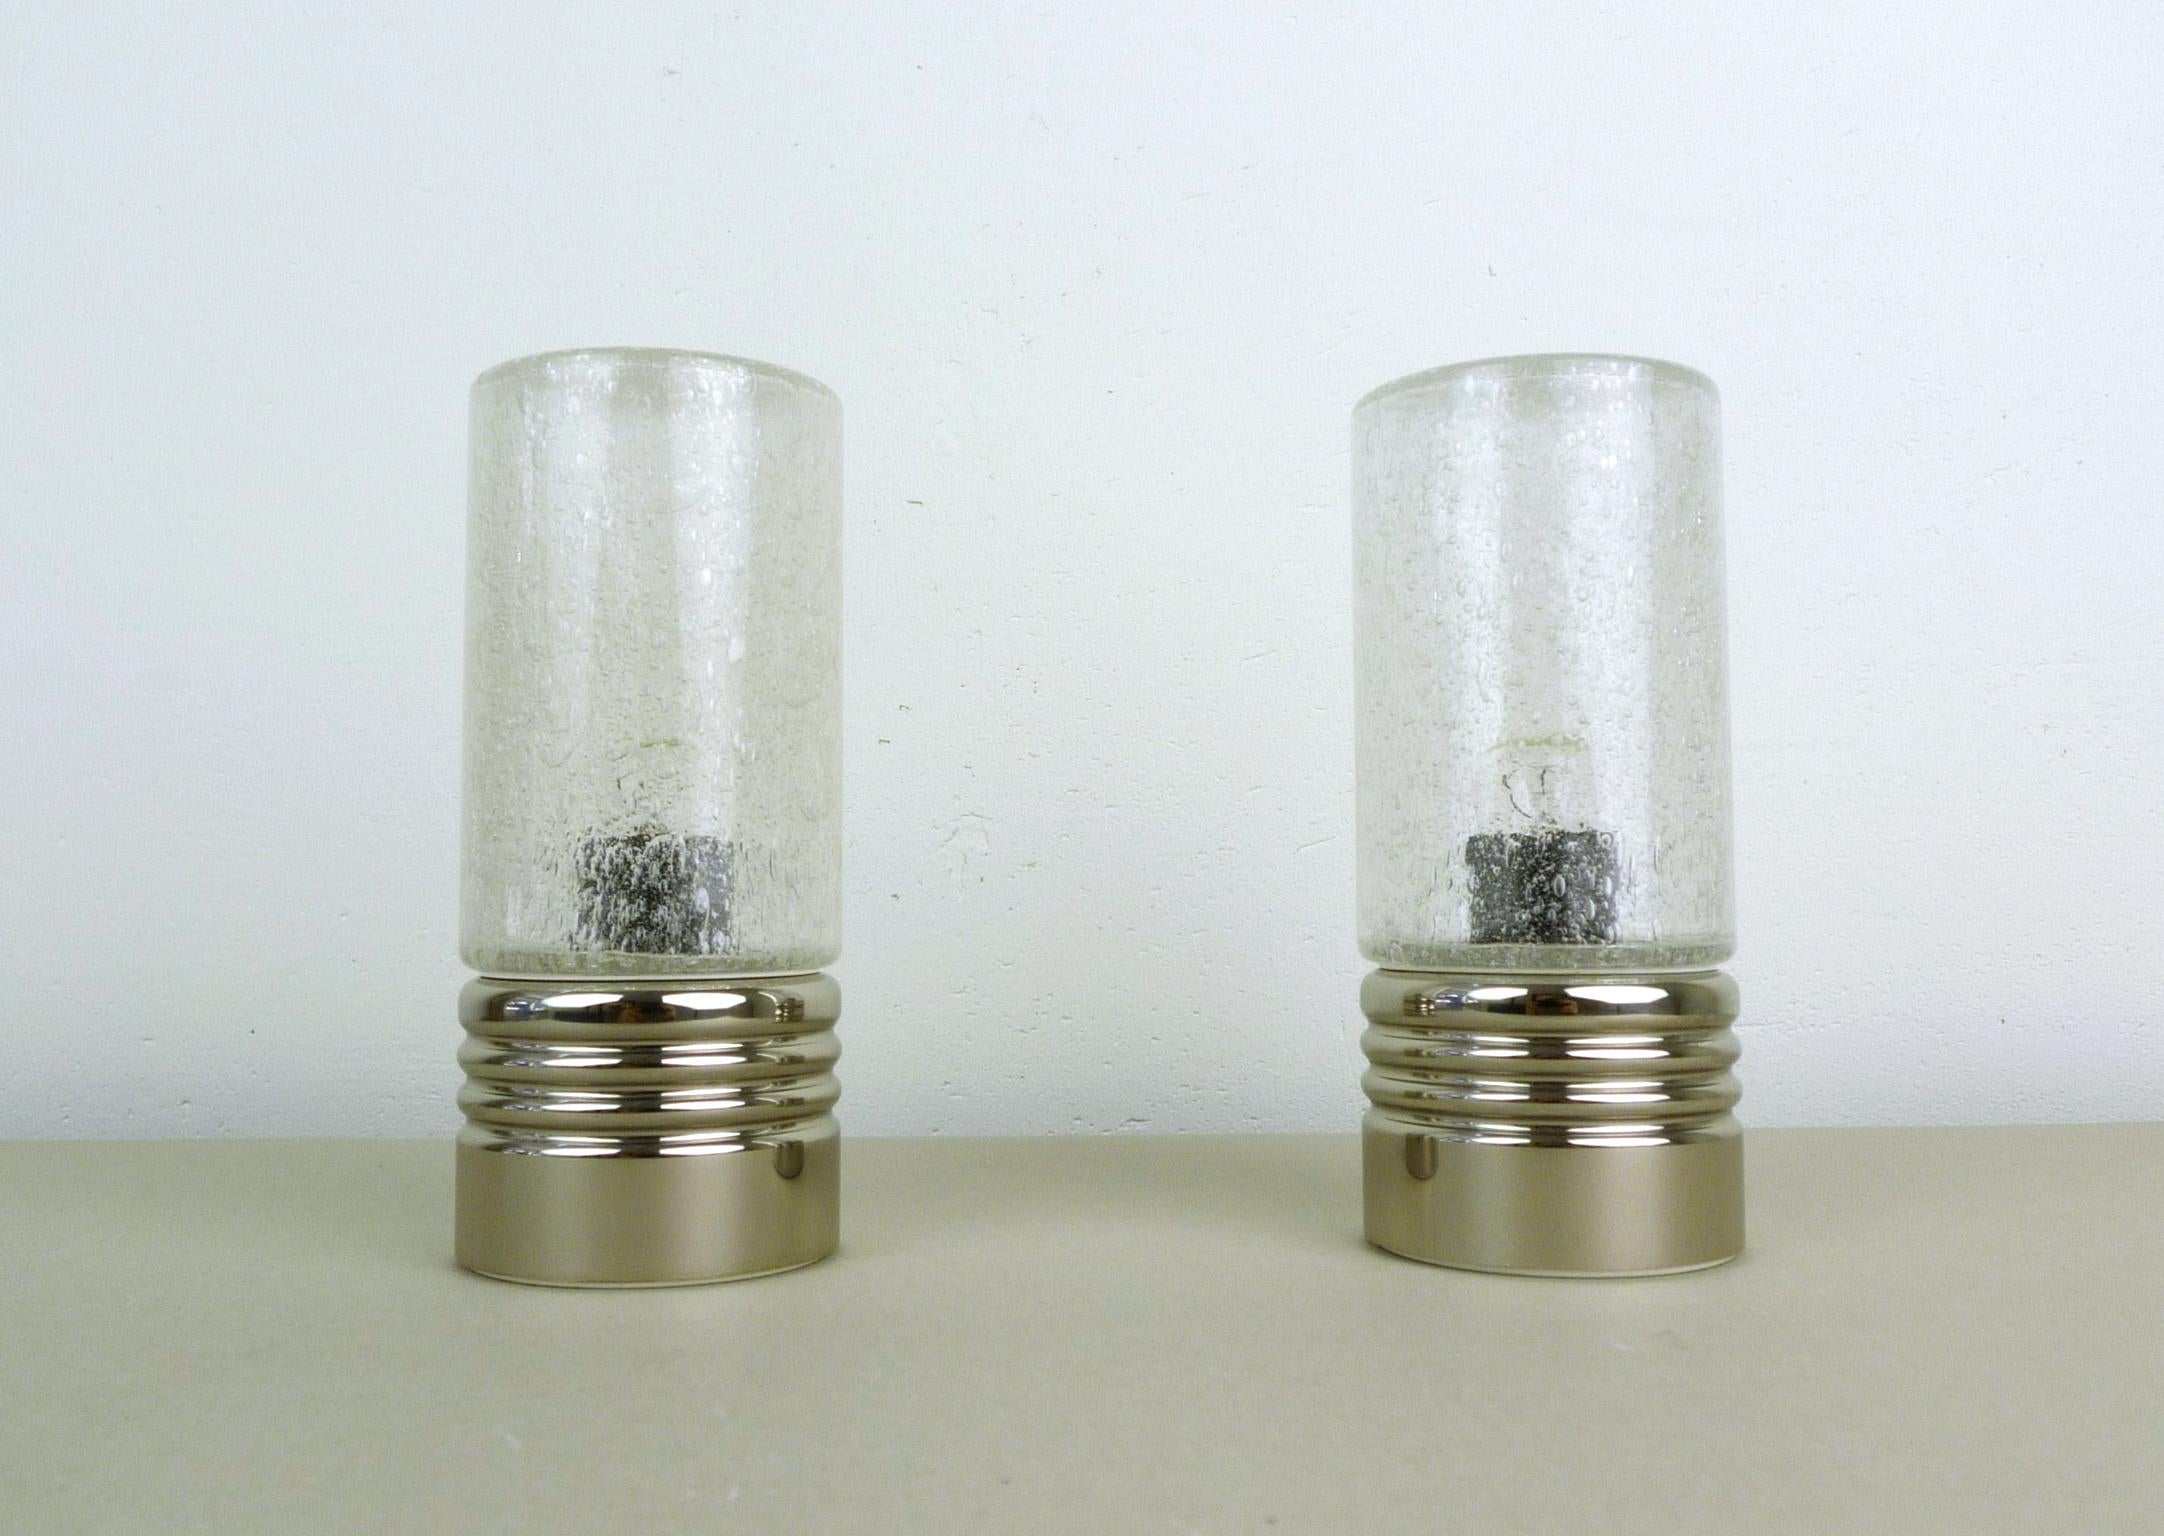 Pair of cylindrical table lamps with chromed metal stands and bubble glass shades from the 1960s. The shades create a sprinkled shadow on the wall. Each lamp is equipped with an E14 bulb socket. Both lamps are in very good condition.